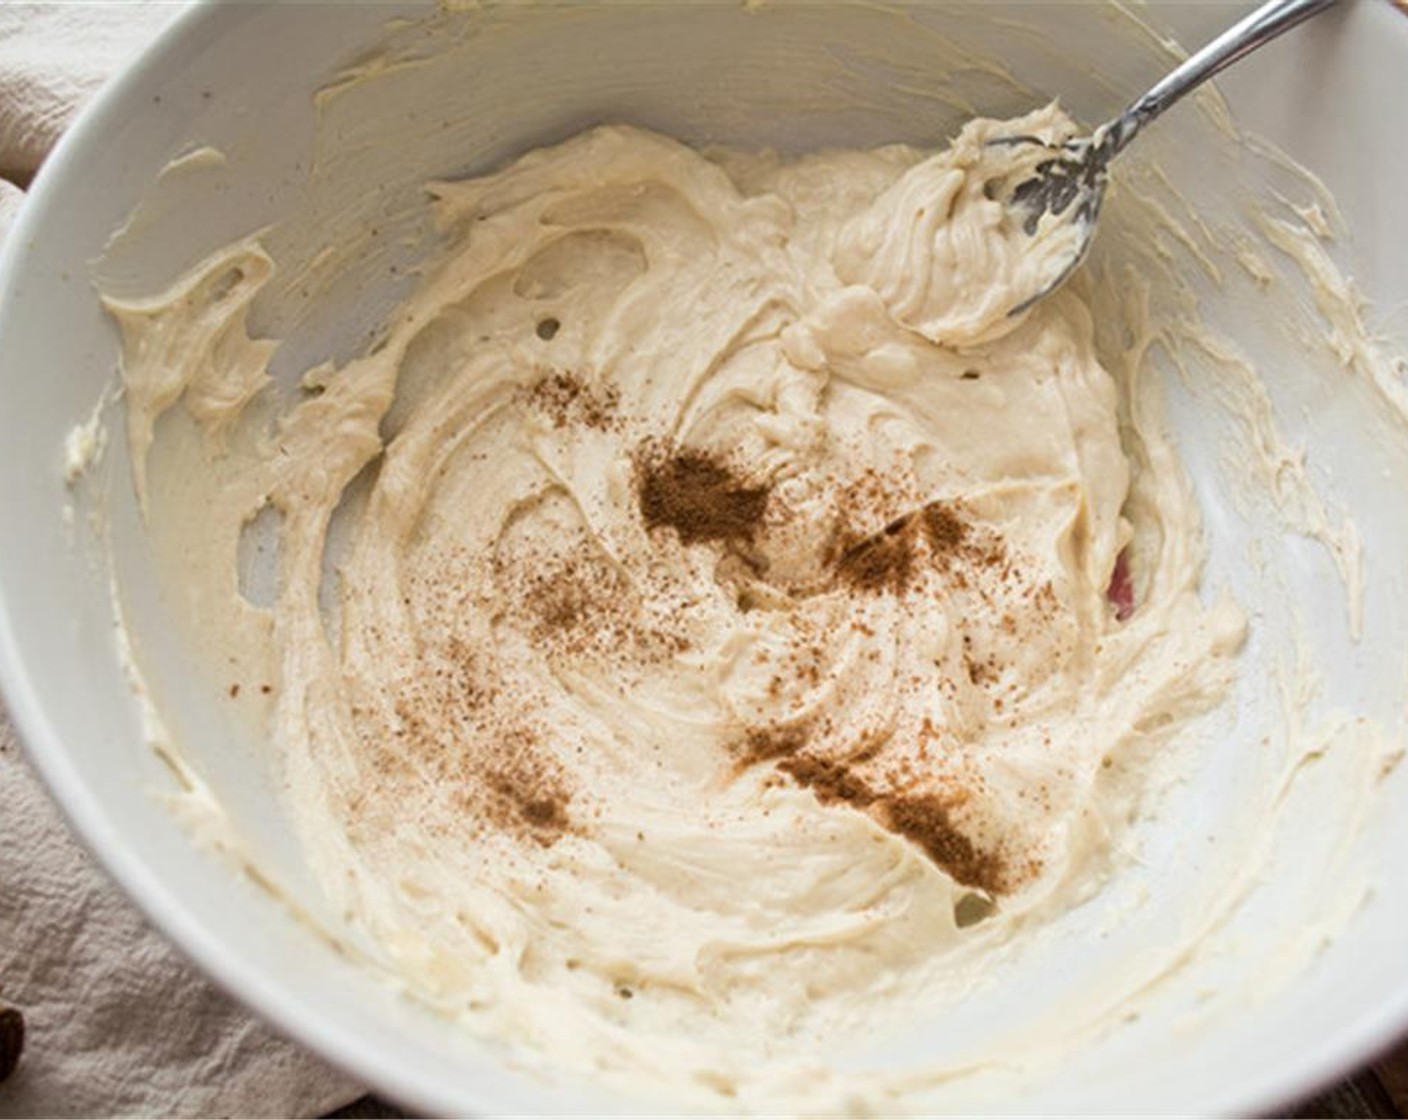 step 6 Remove cookies from pan to a wire rack and allow to cool completely. To make cream cheese filling, beat softened Unsalted Butter (1/3 cup), Cream Cheese (3/4 cup), Honey (1/4 cup), Vanilla Extract (1 tsp) and Ground Cinnamon (1/8 tsp) in a bowl.